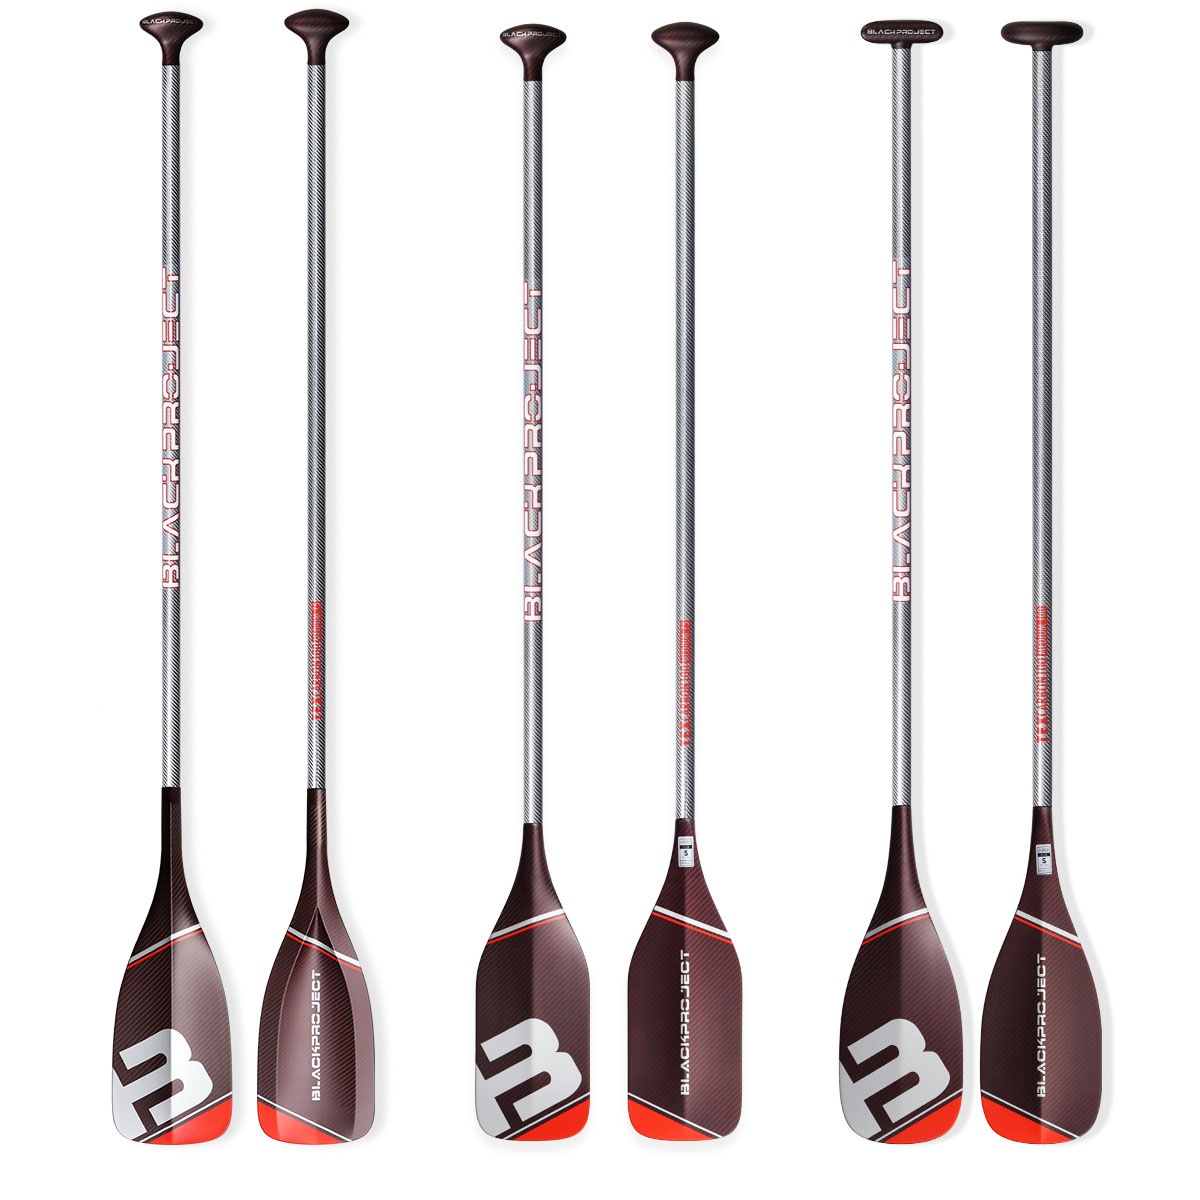 sup paddle, black project paddles, TEXCARBON paddle, hydro flow x, hydro paddle, surge paddle, racing paddle, surfing paddle, lightest paddles, strongest sup paddle, usa made, made in hawaii